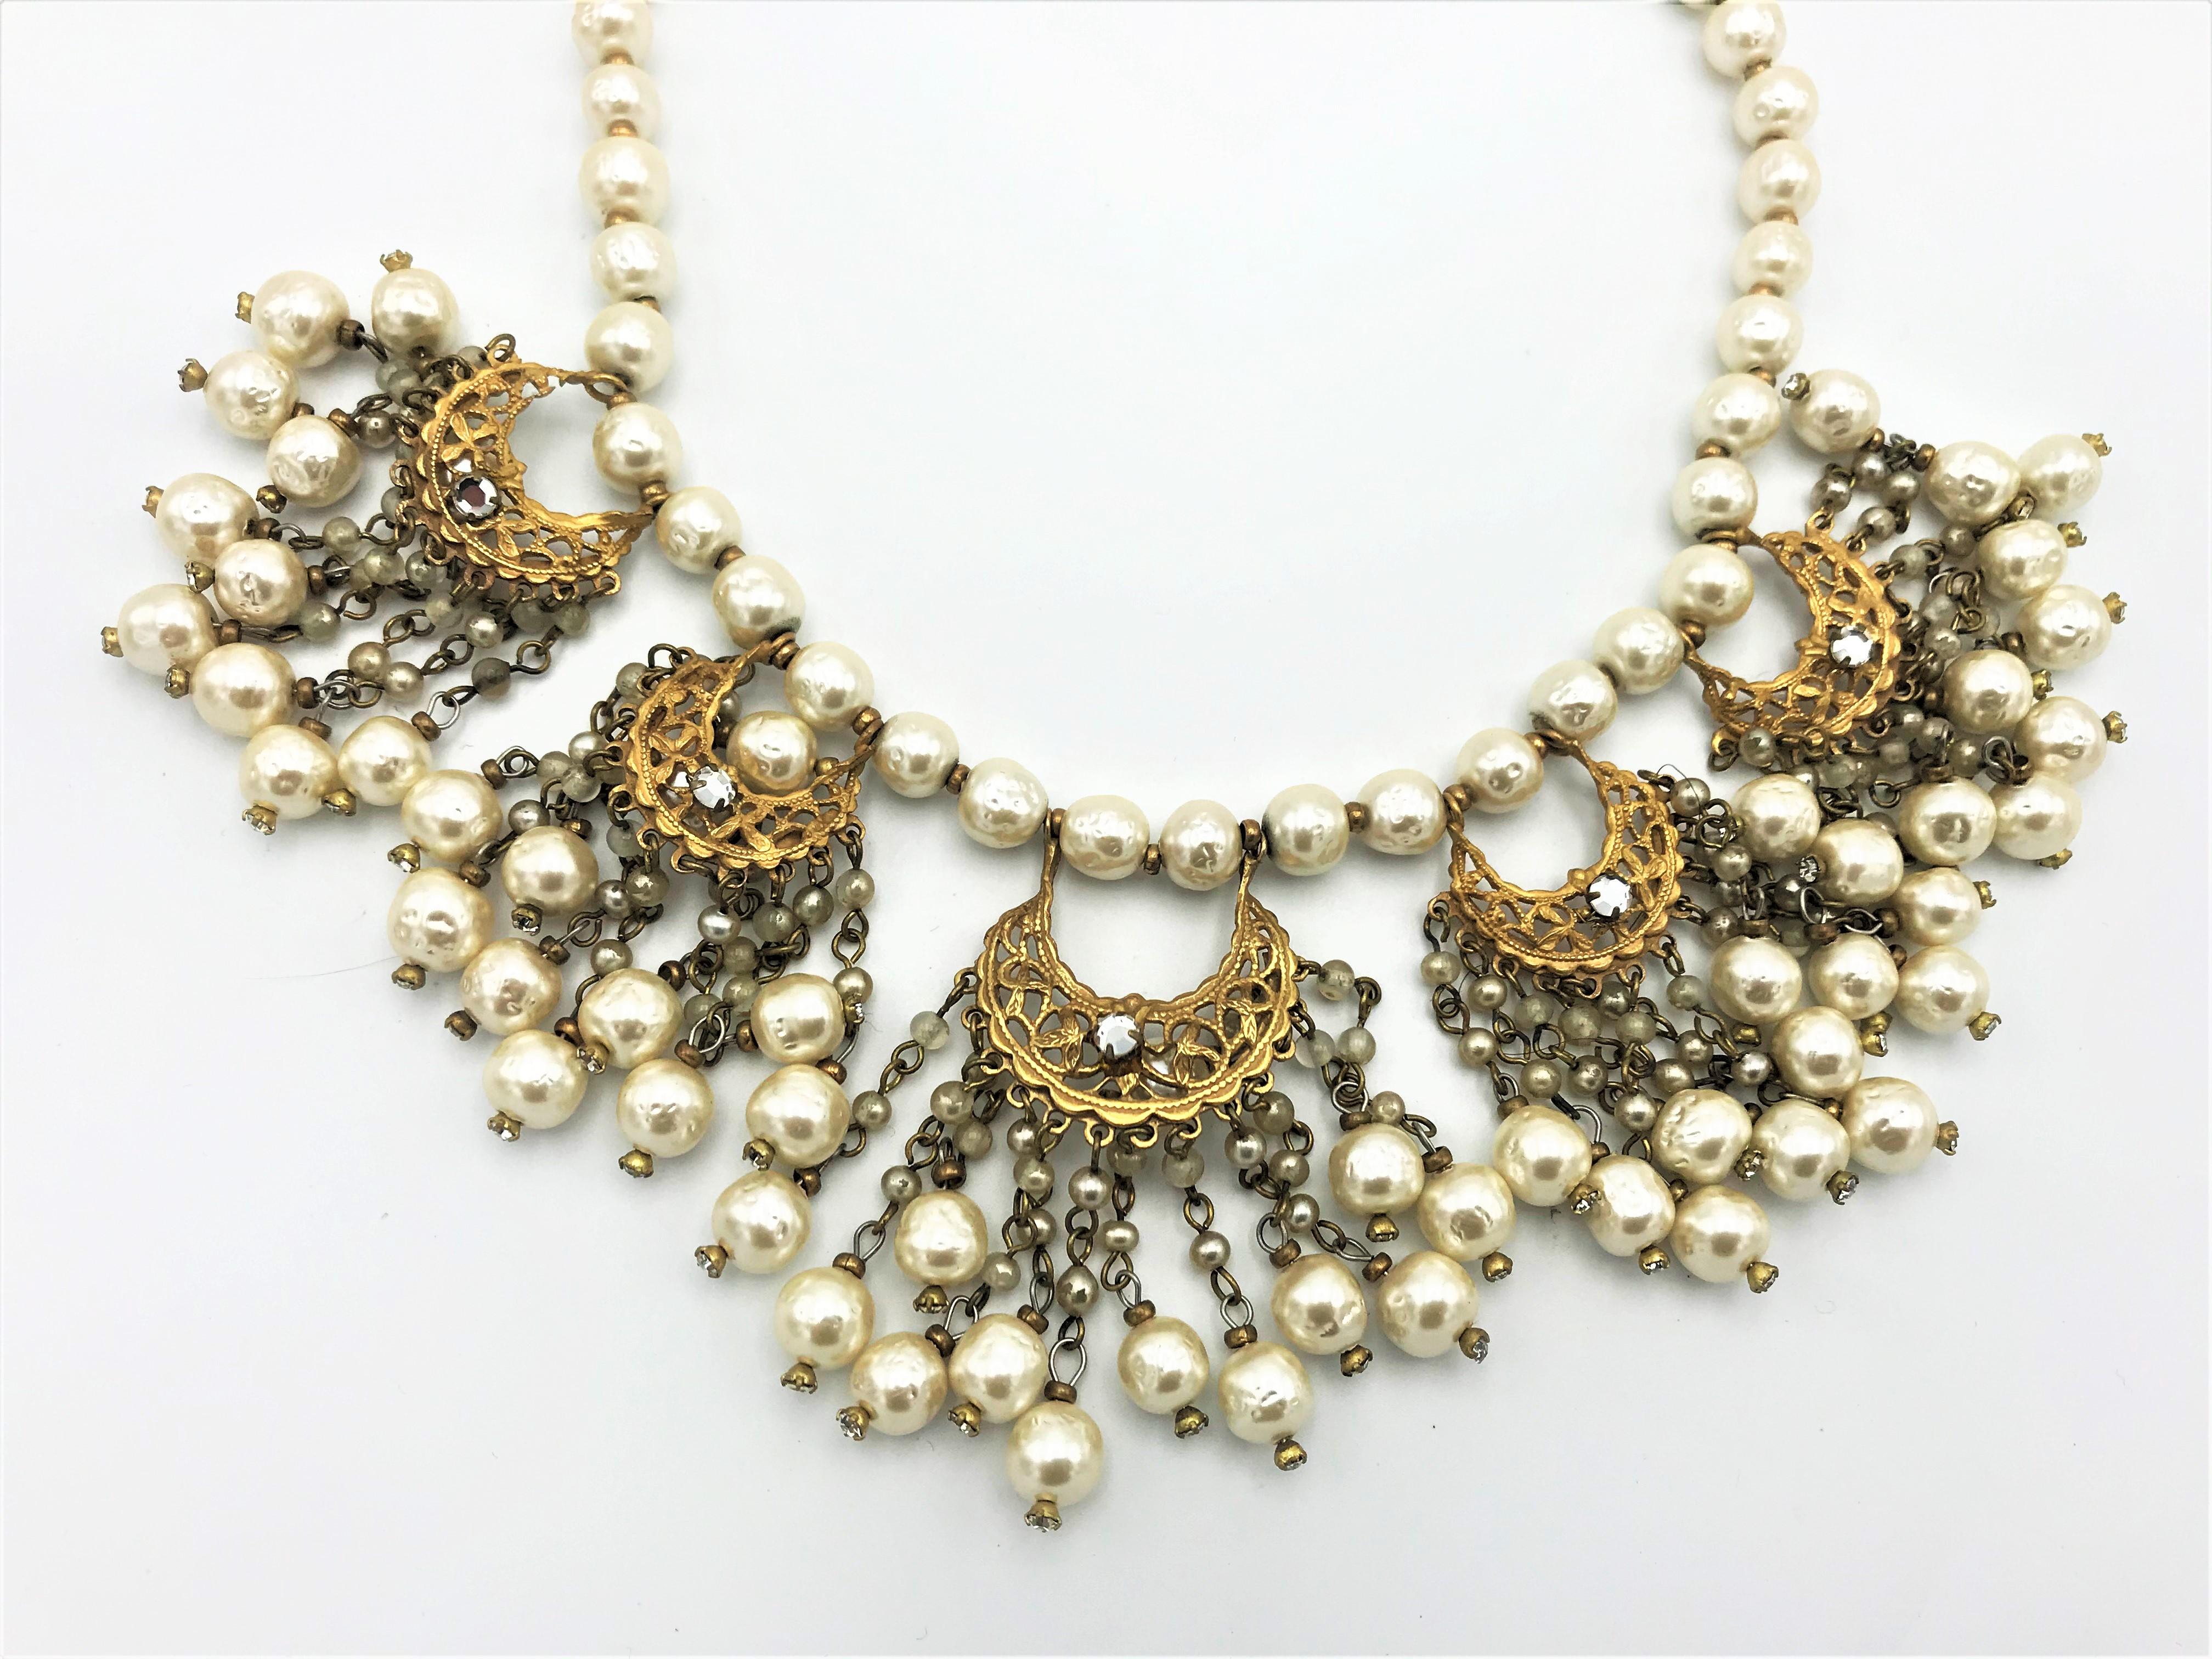 A very rare and beautiful wearable necklace with matching ear clip by Miriam Haskell. The necklace 42 cm long, made of fake barock pearls.
5 Indian crescent moons with 13 pearl tassels each hang on it. The claps is made of the floral motif covered